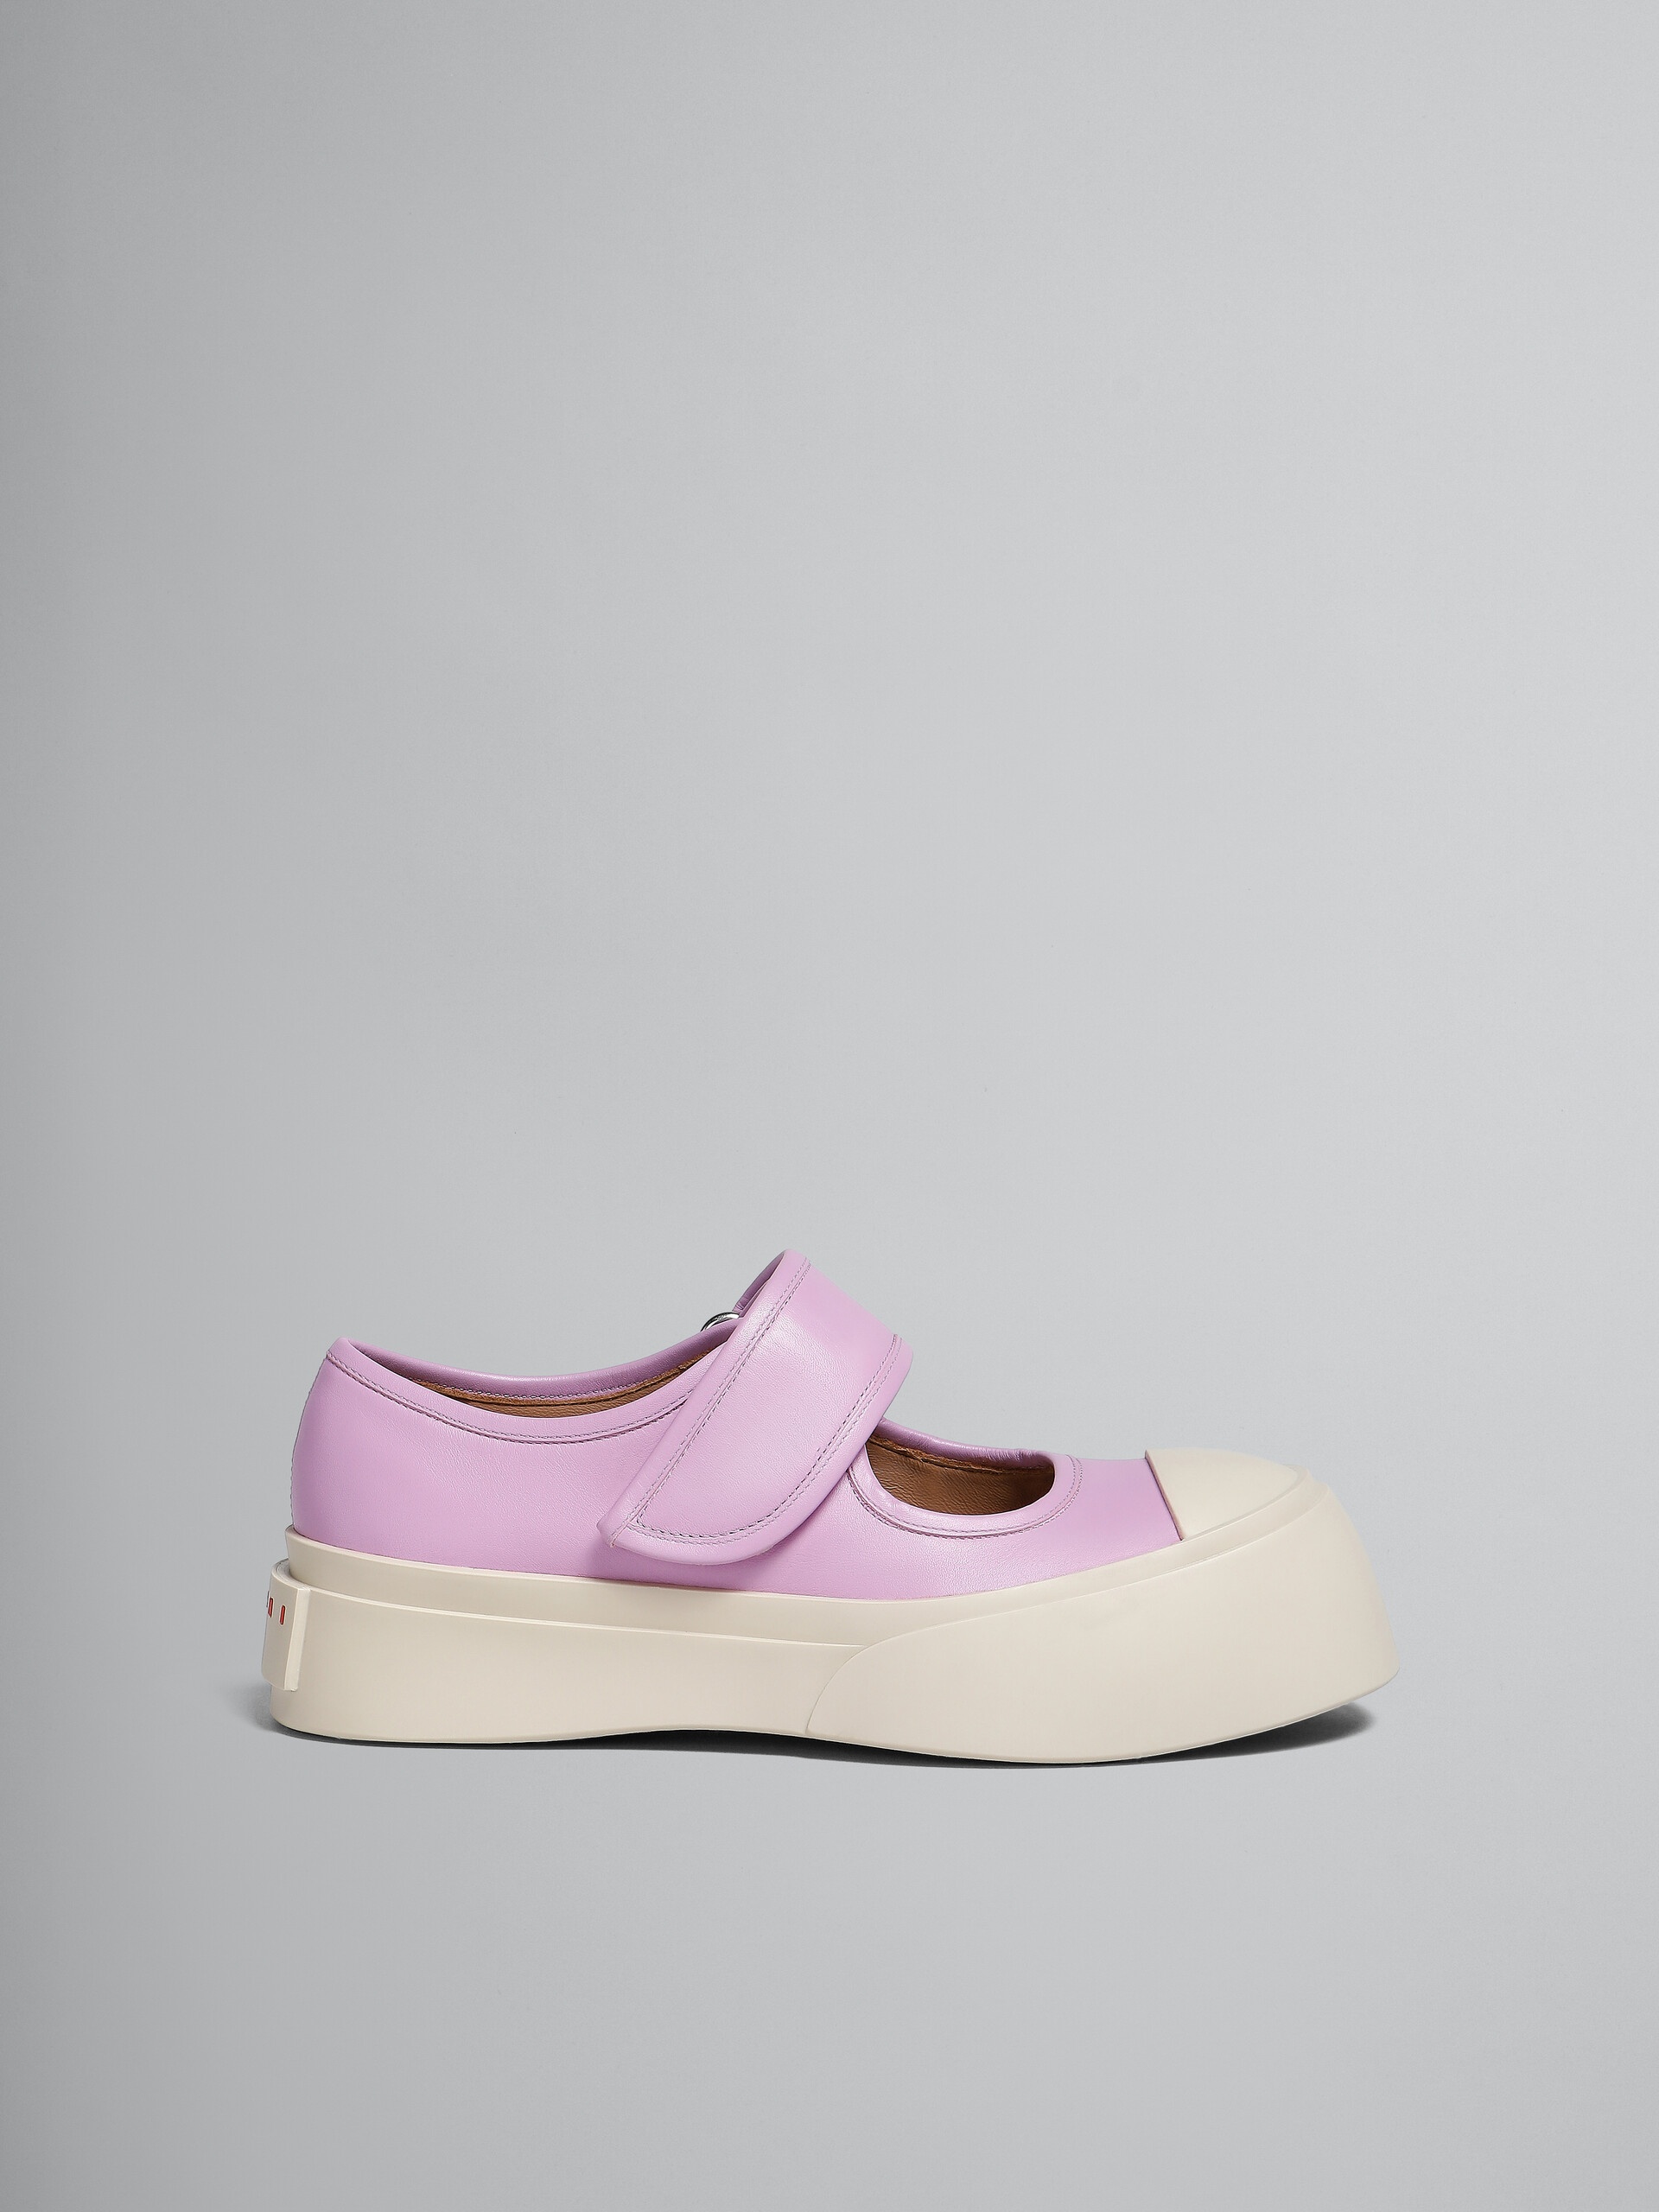 LILAC NAPPA LEATHER MARY JANE SNEAKER - 1